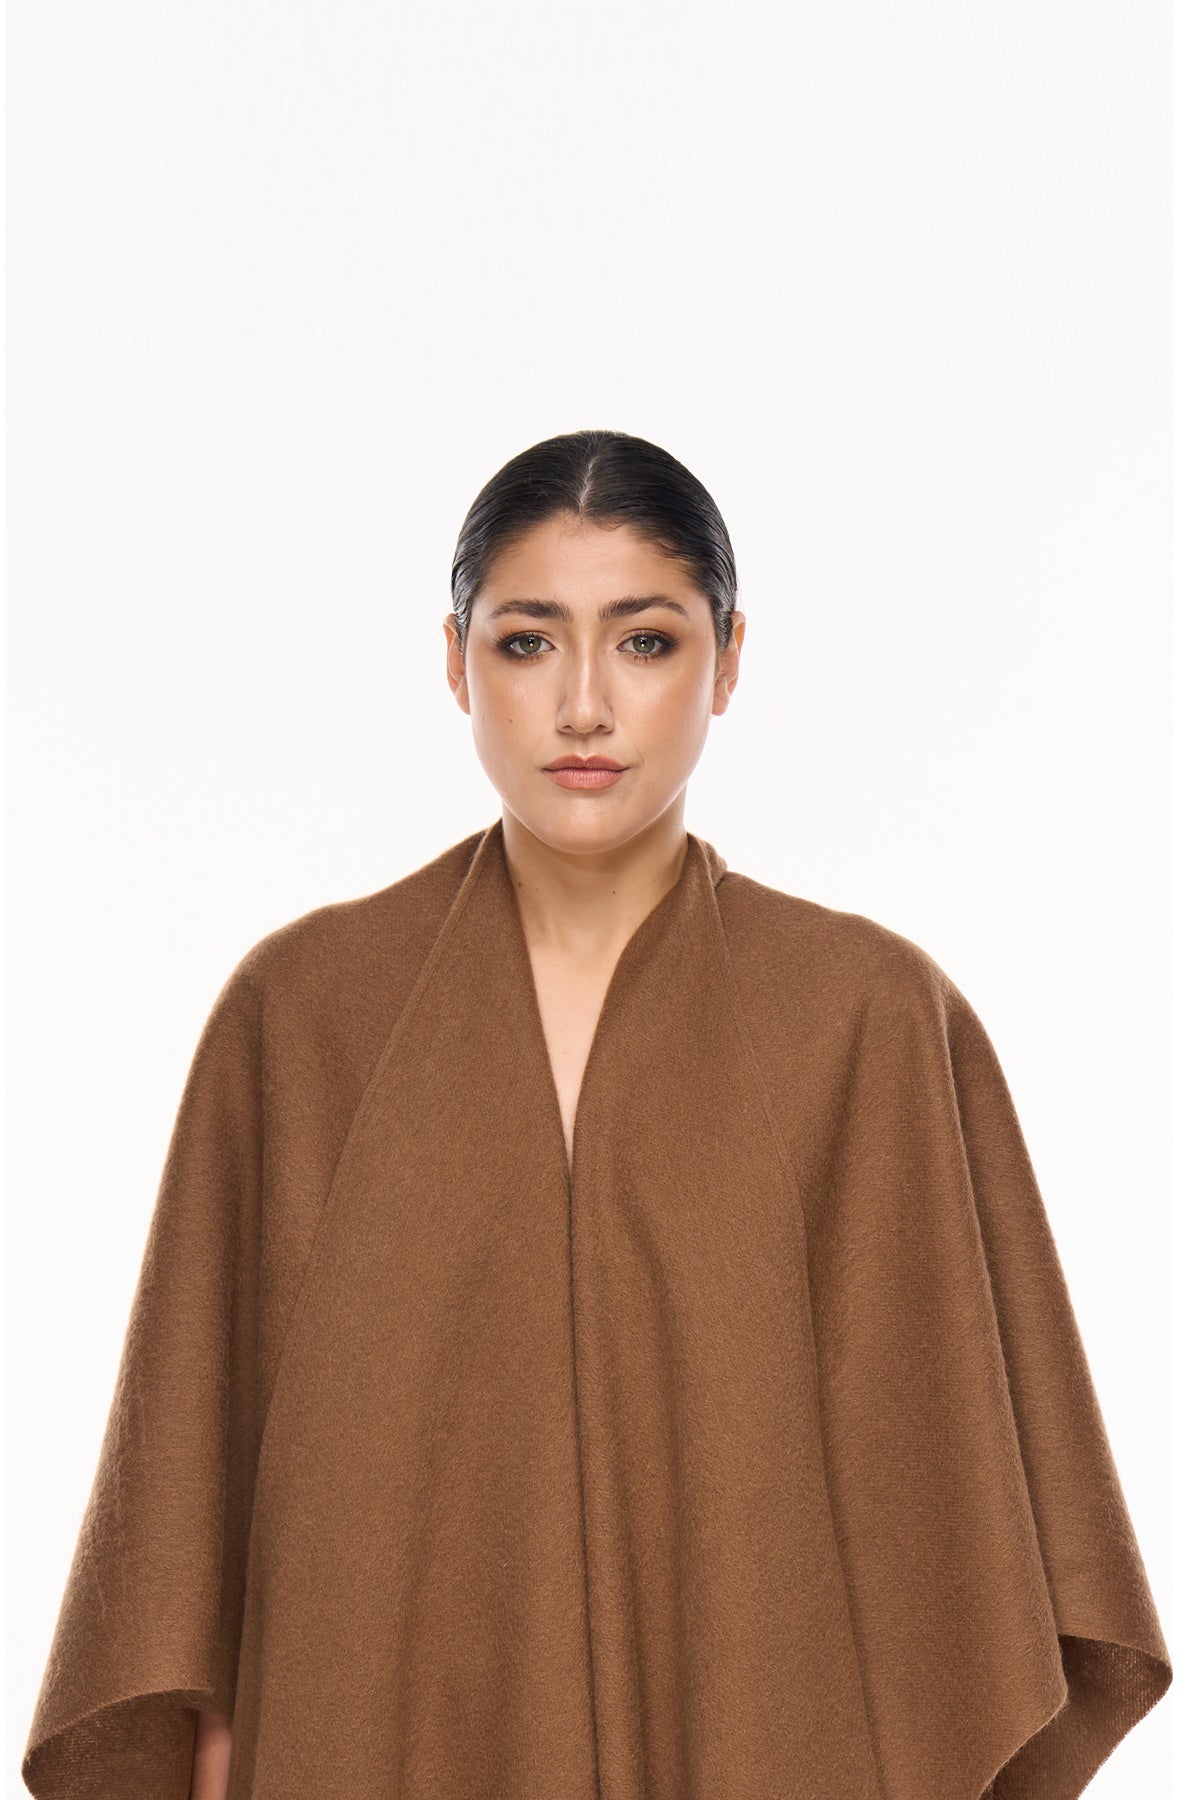 Plain Cape Brown Poncho 100% Pure Lambswool